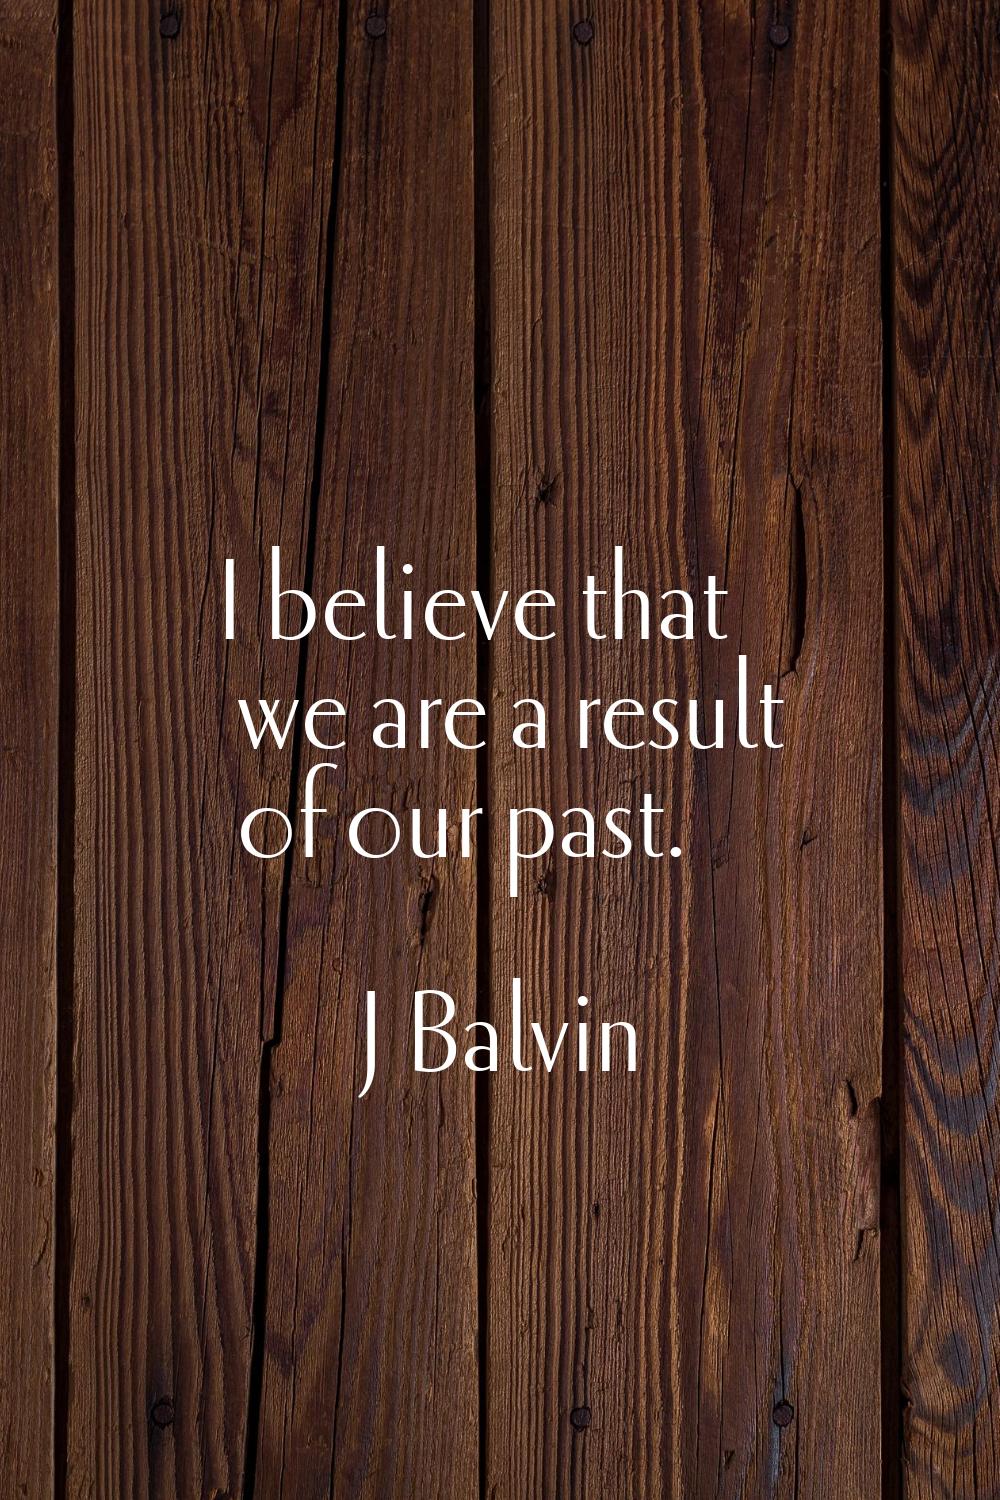 I believe that we are a result of our past.